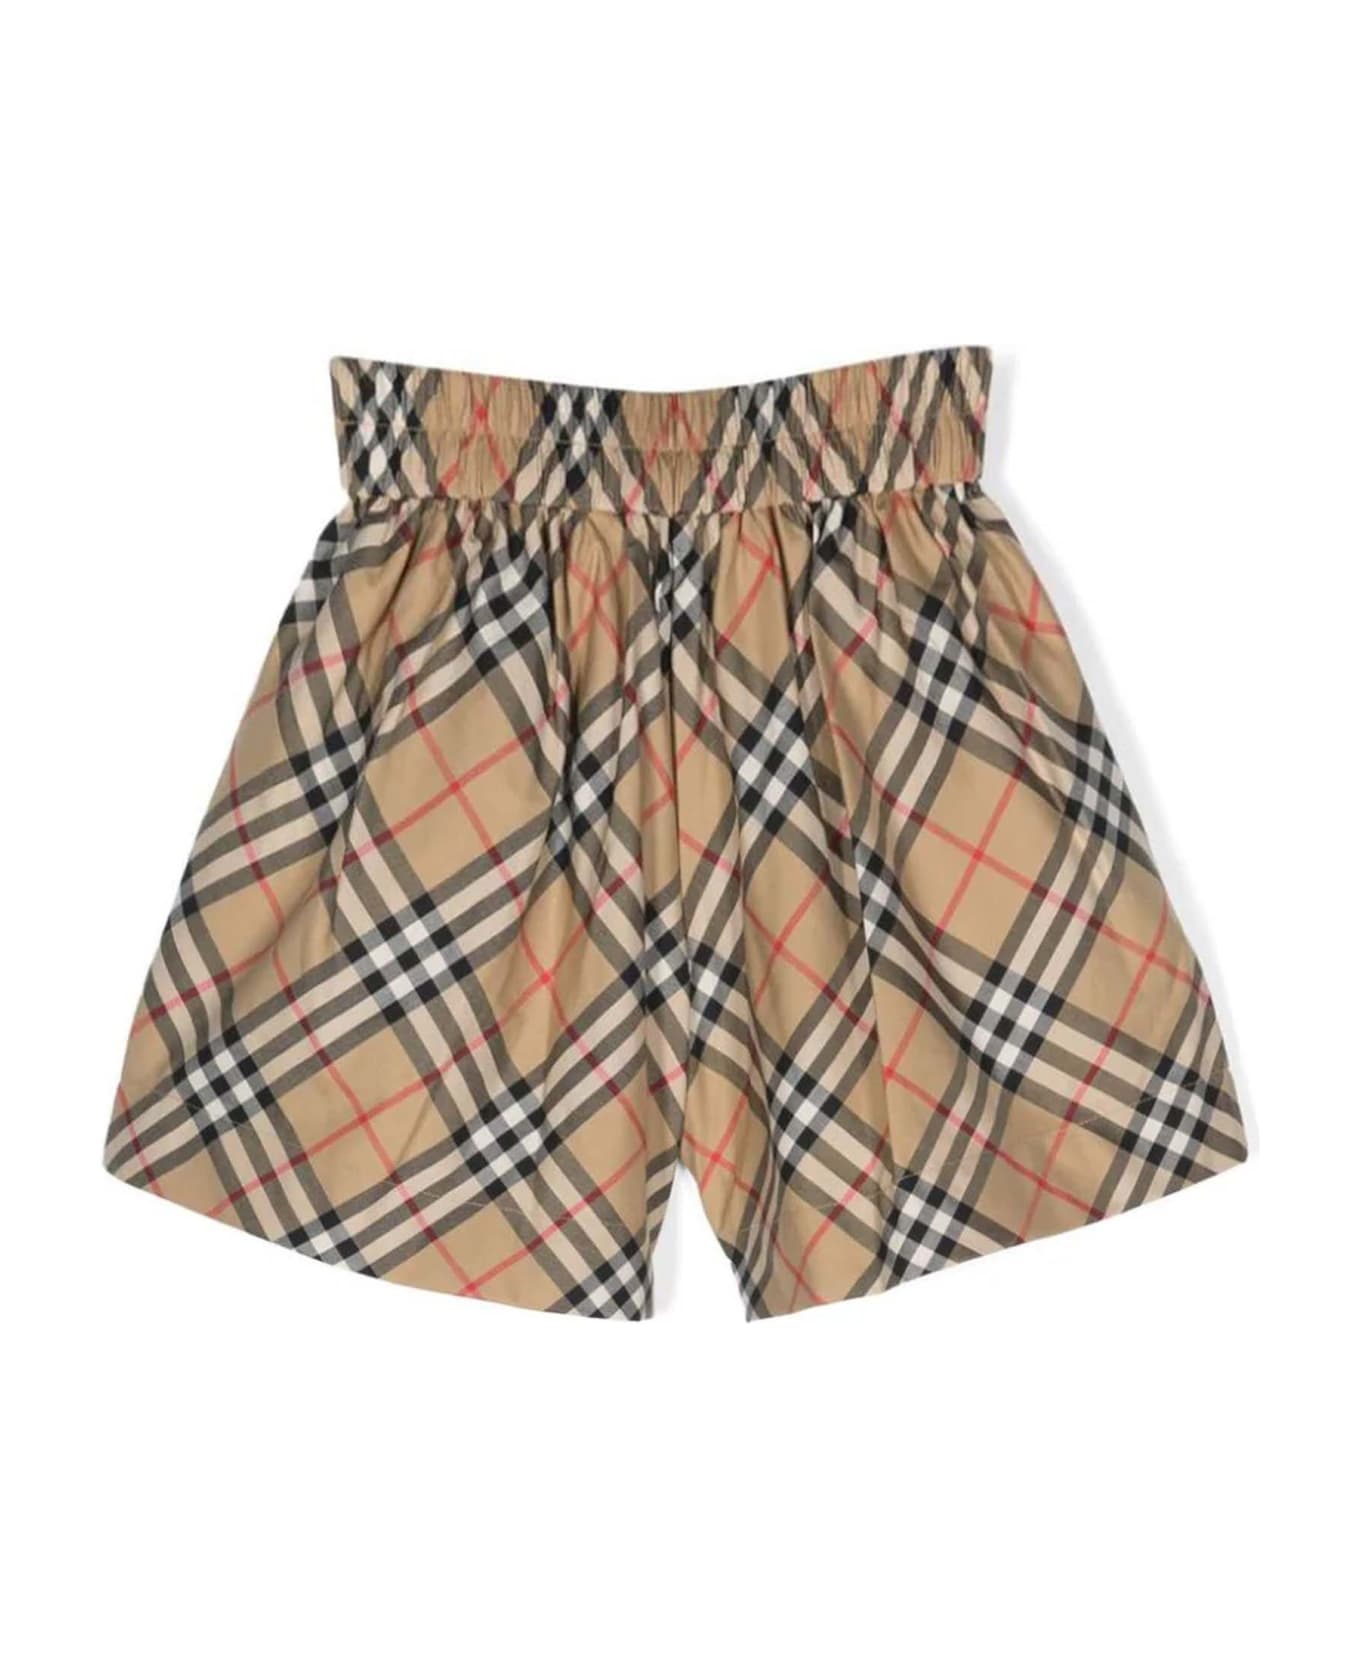 Burberry Vintage Check-pattern Cotton Shorts - Archive beige ip chk ボトムス